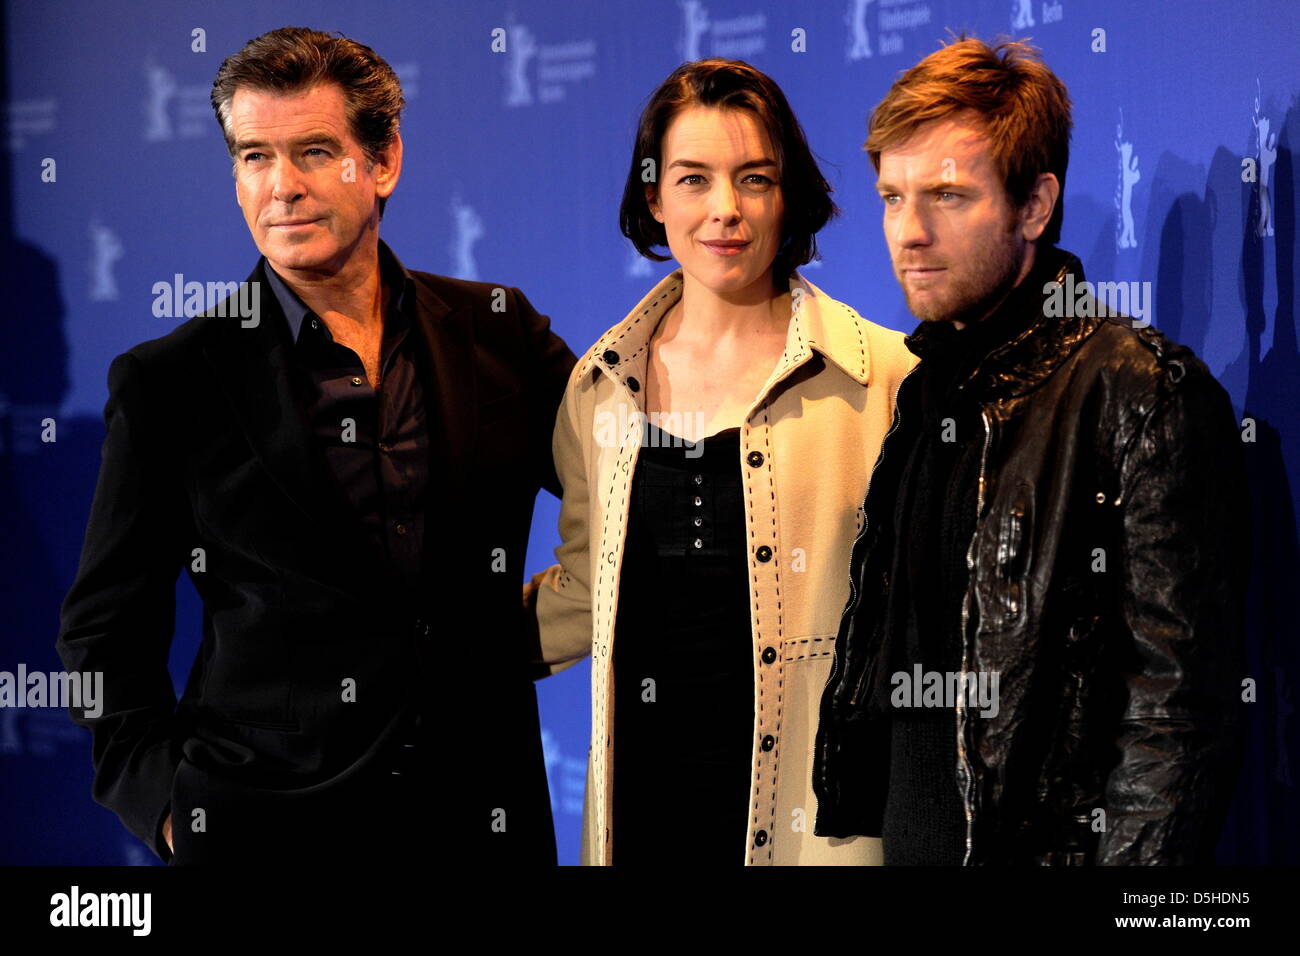 US actor Pierce Brosnan (l-r), British actress Olivia Williams and Scottish actor Ewan McGregor attend the photocall for the film 'The Ghost Writer' running in competion during the 60th Berlinale international film festival Friday, 12 February 2010 in Berlin. Photo: Marcus Brandt dpa/lbn Stock Photo